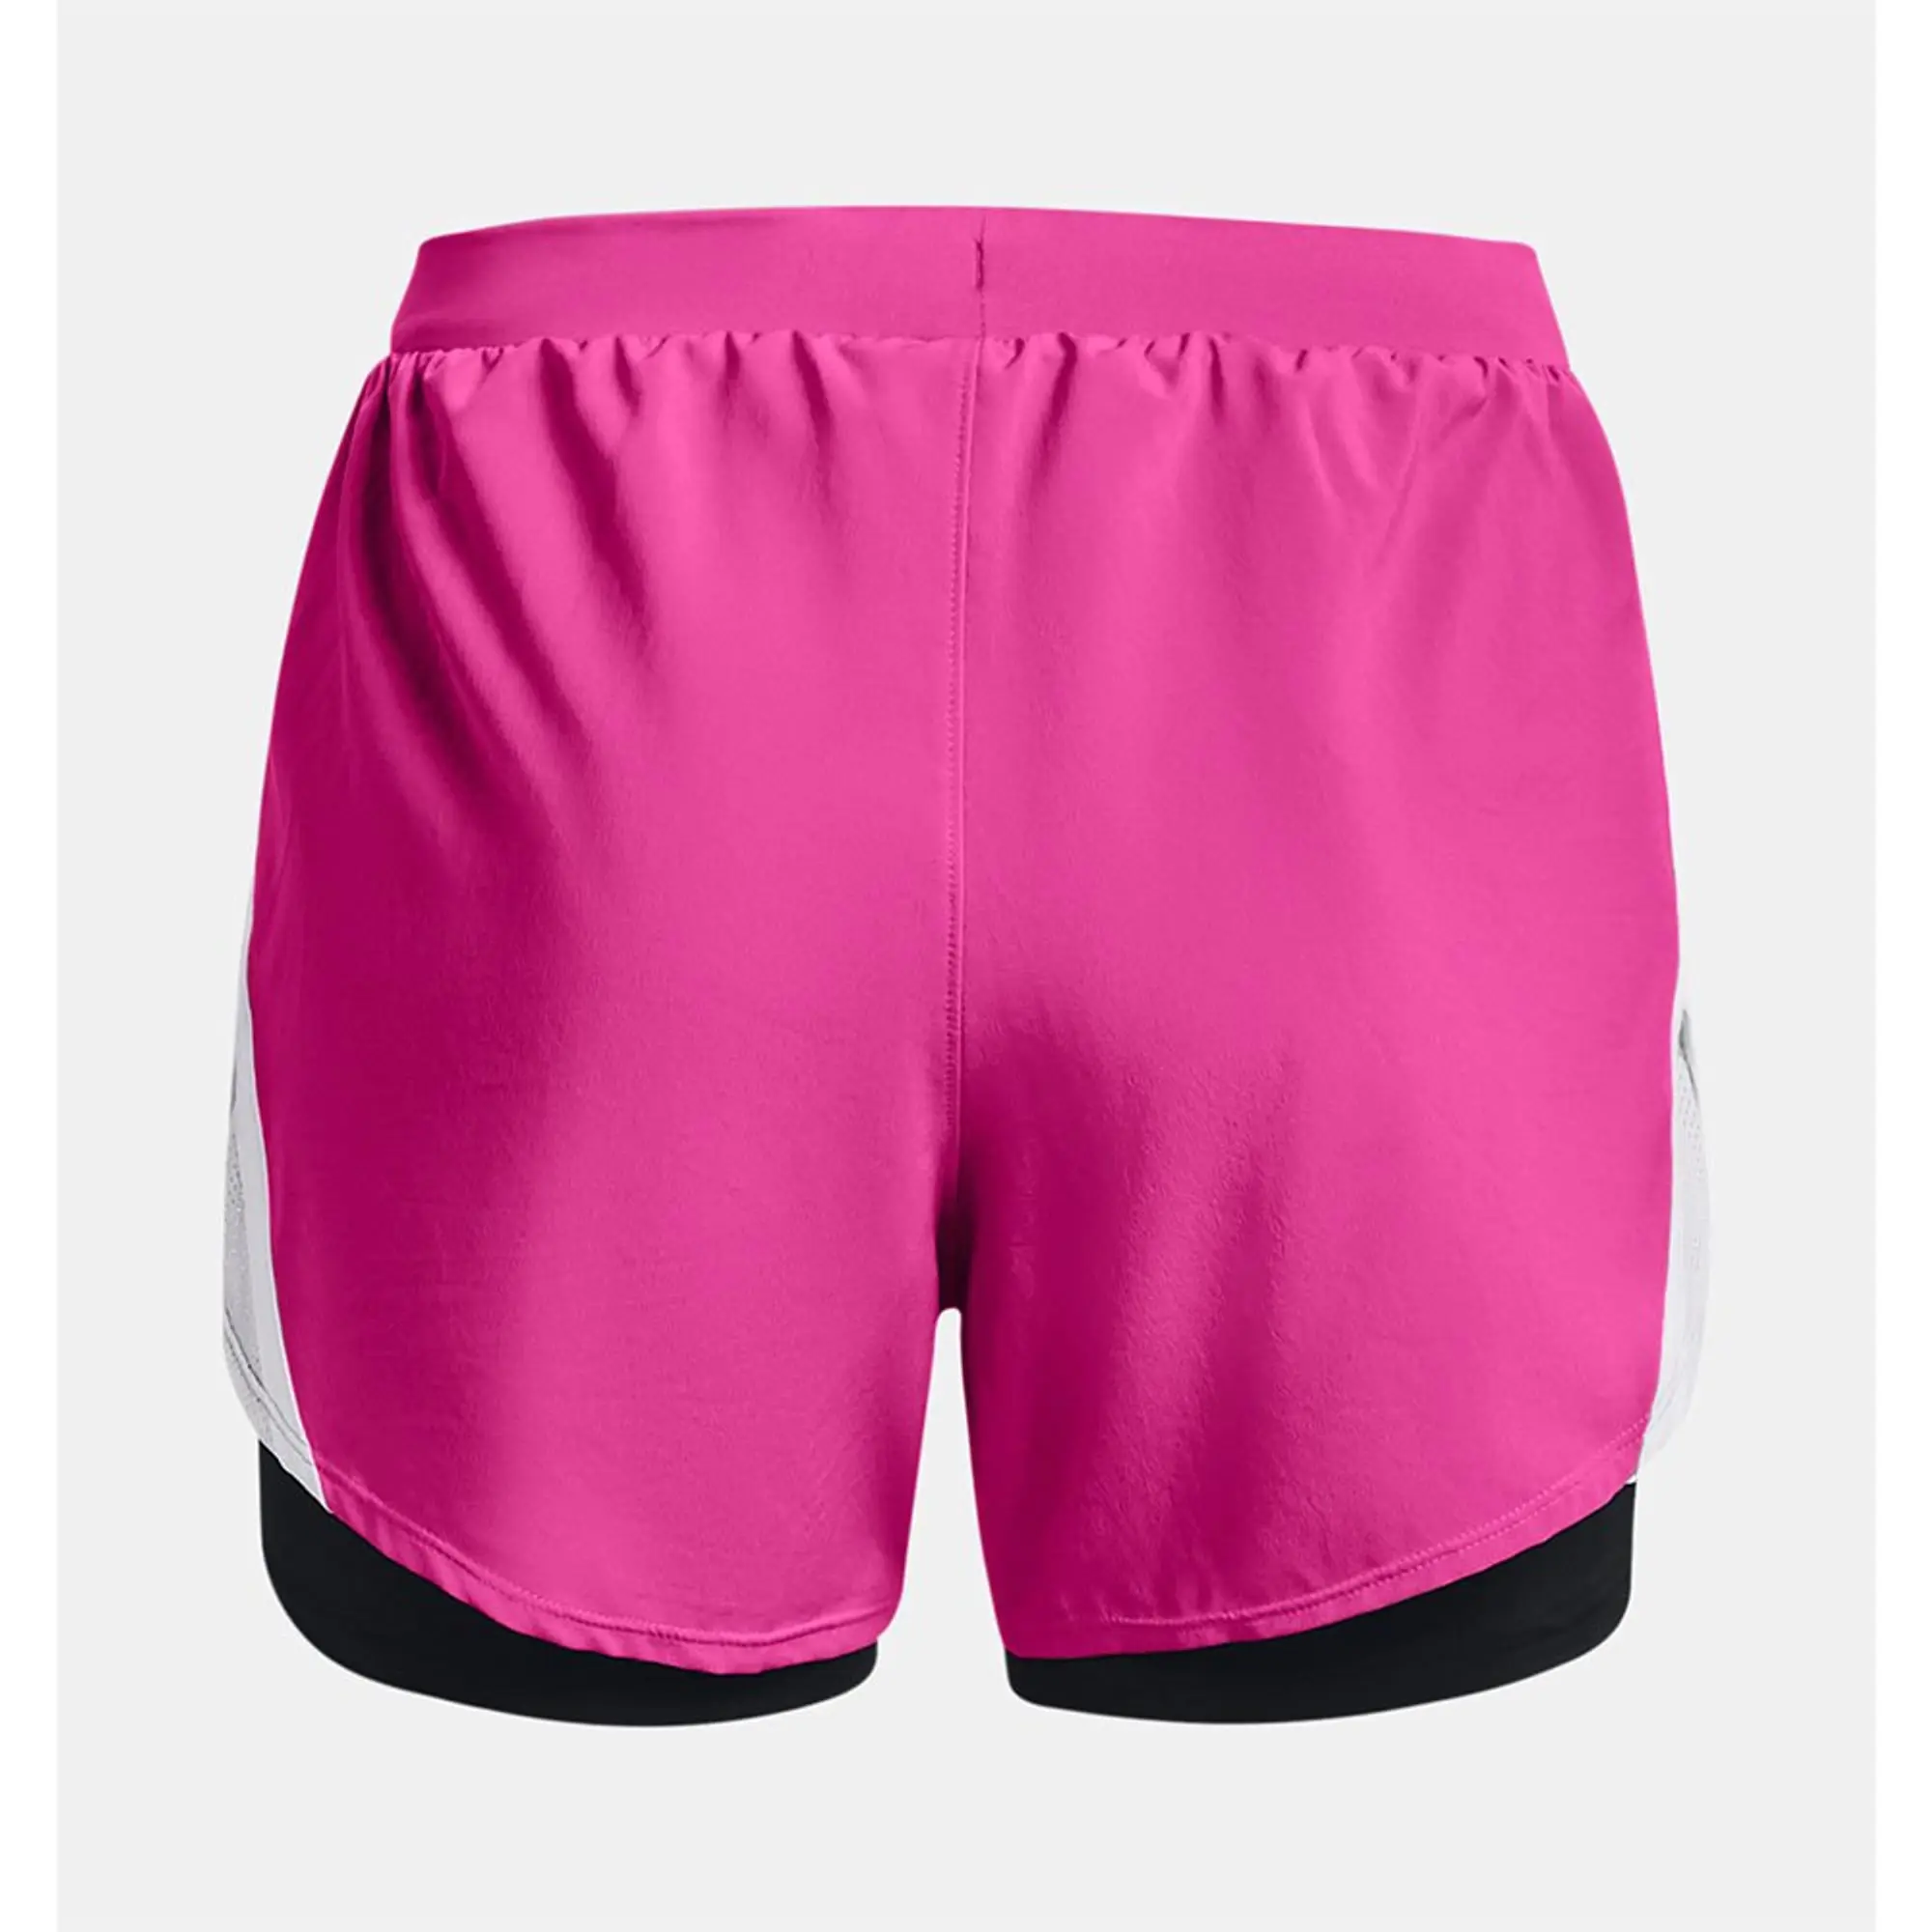 Under Armour Fly By 2.0 2N1 Short - Pink